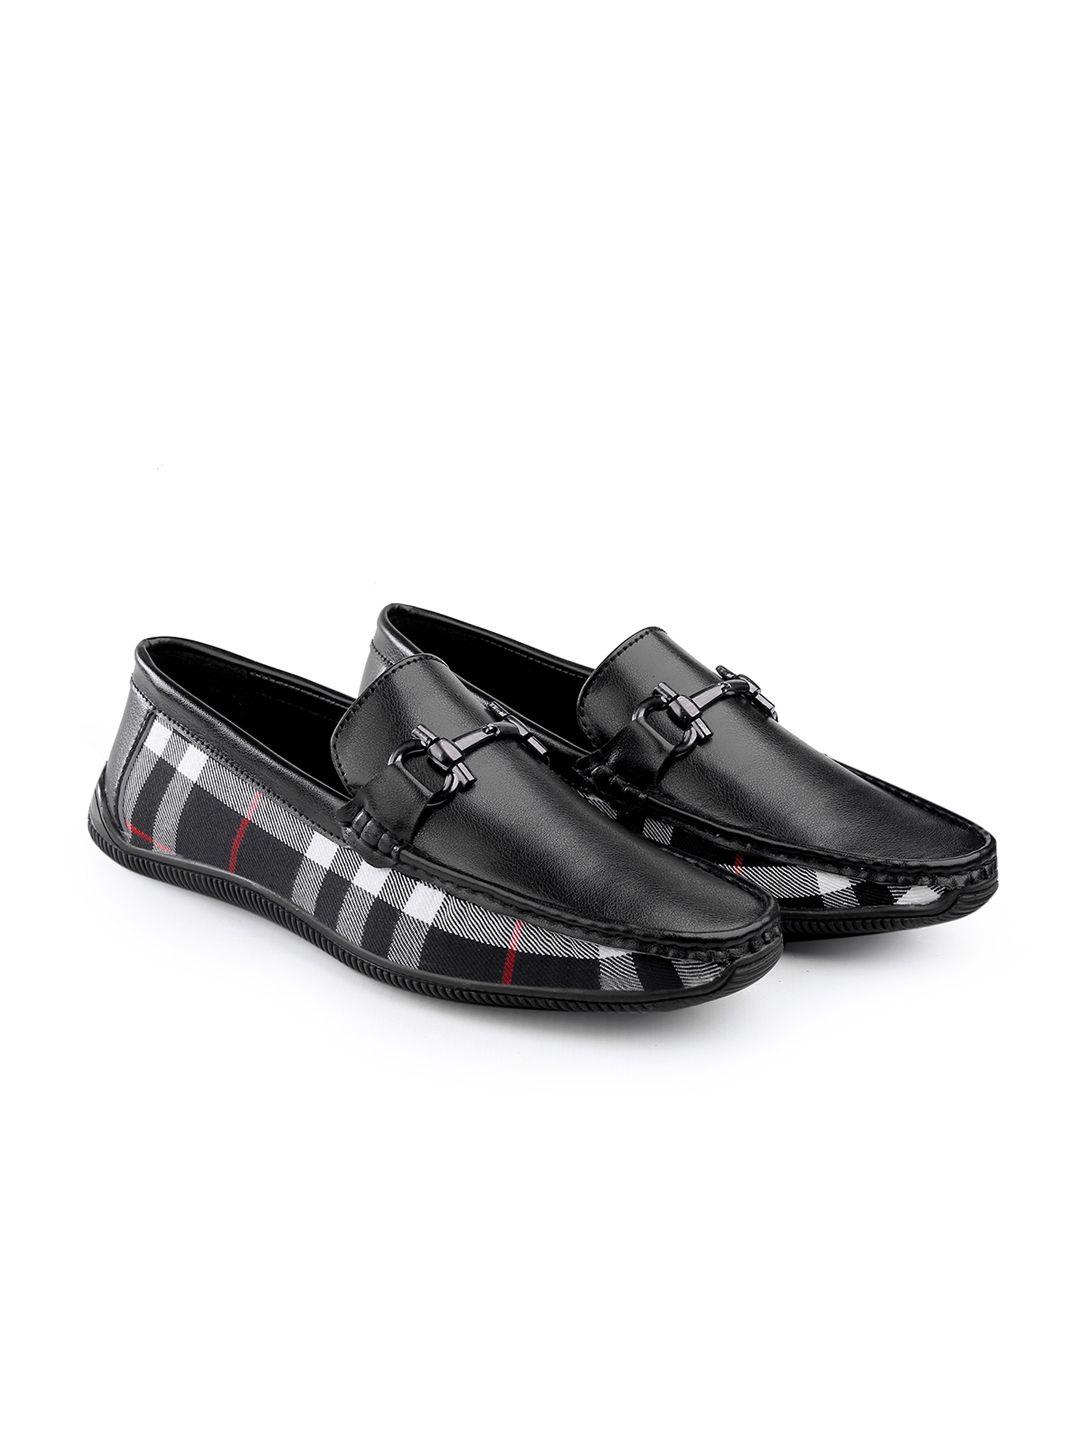 bxxy men slip on printed loafers